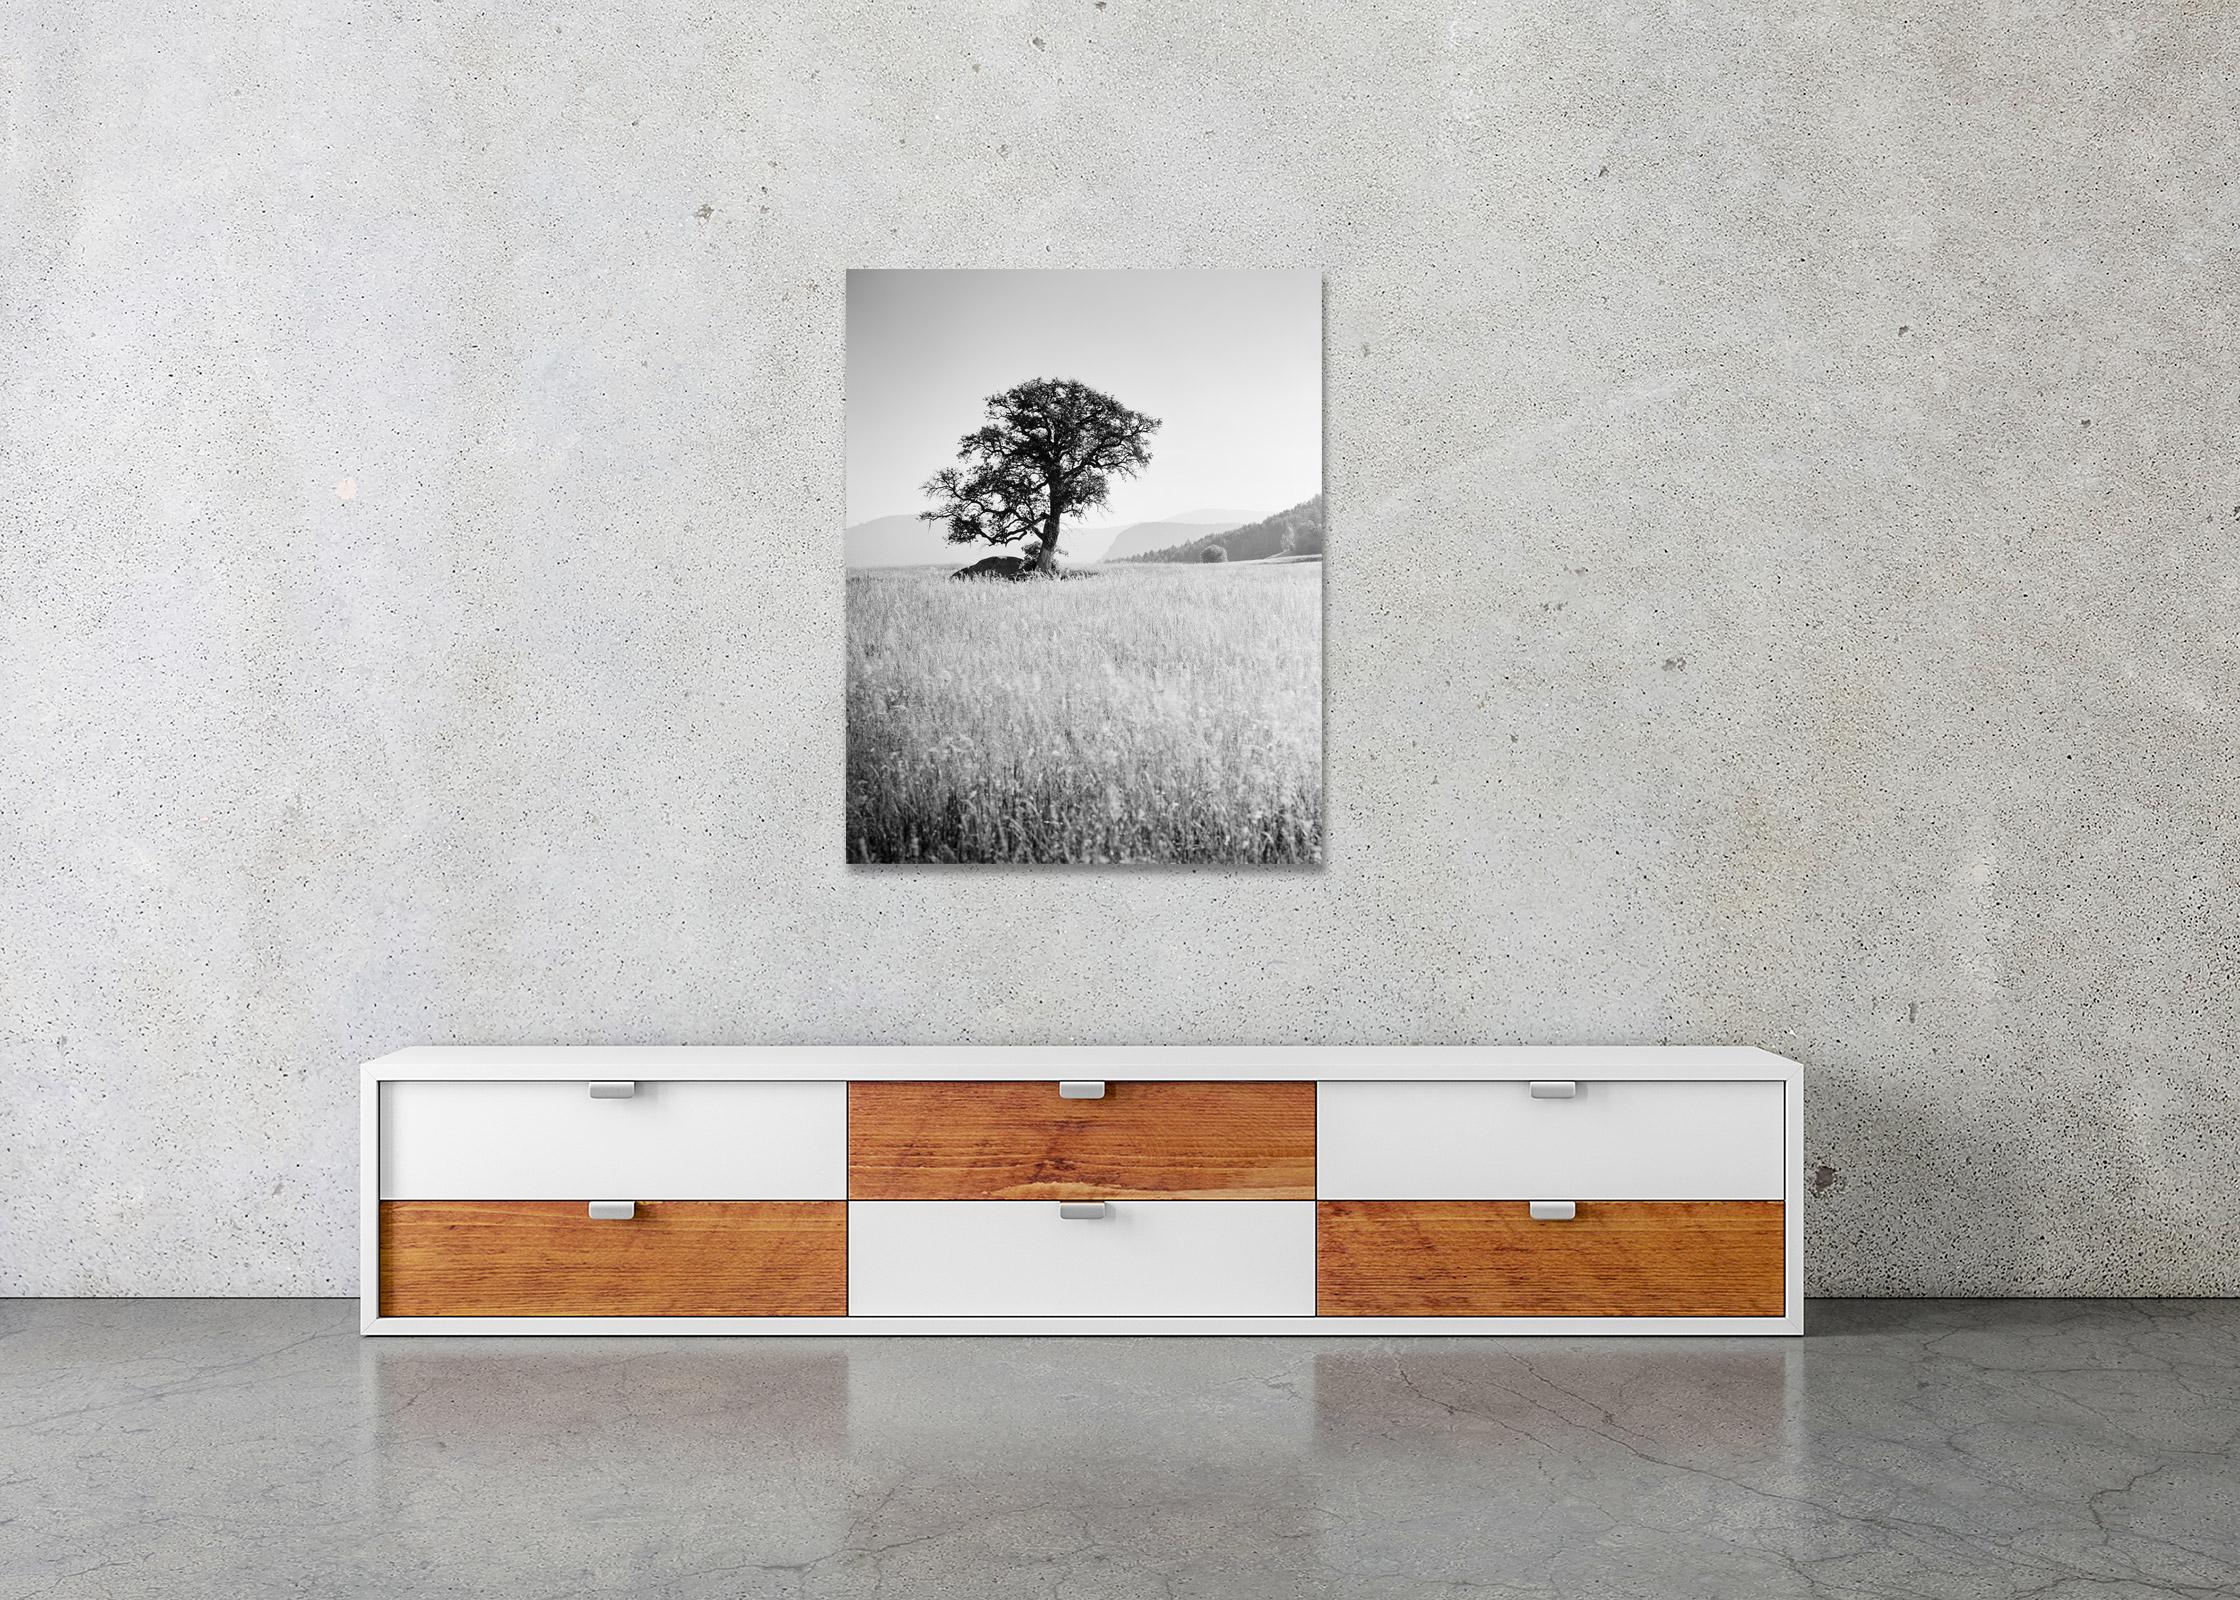 Morning Sun, single tree, Seiser Alm, black and white landscape, art photography For Sale 2